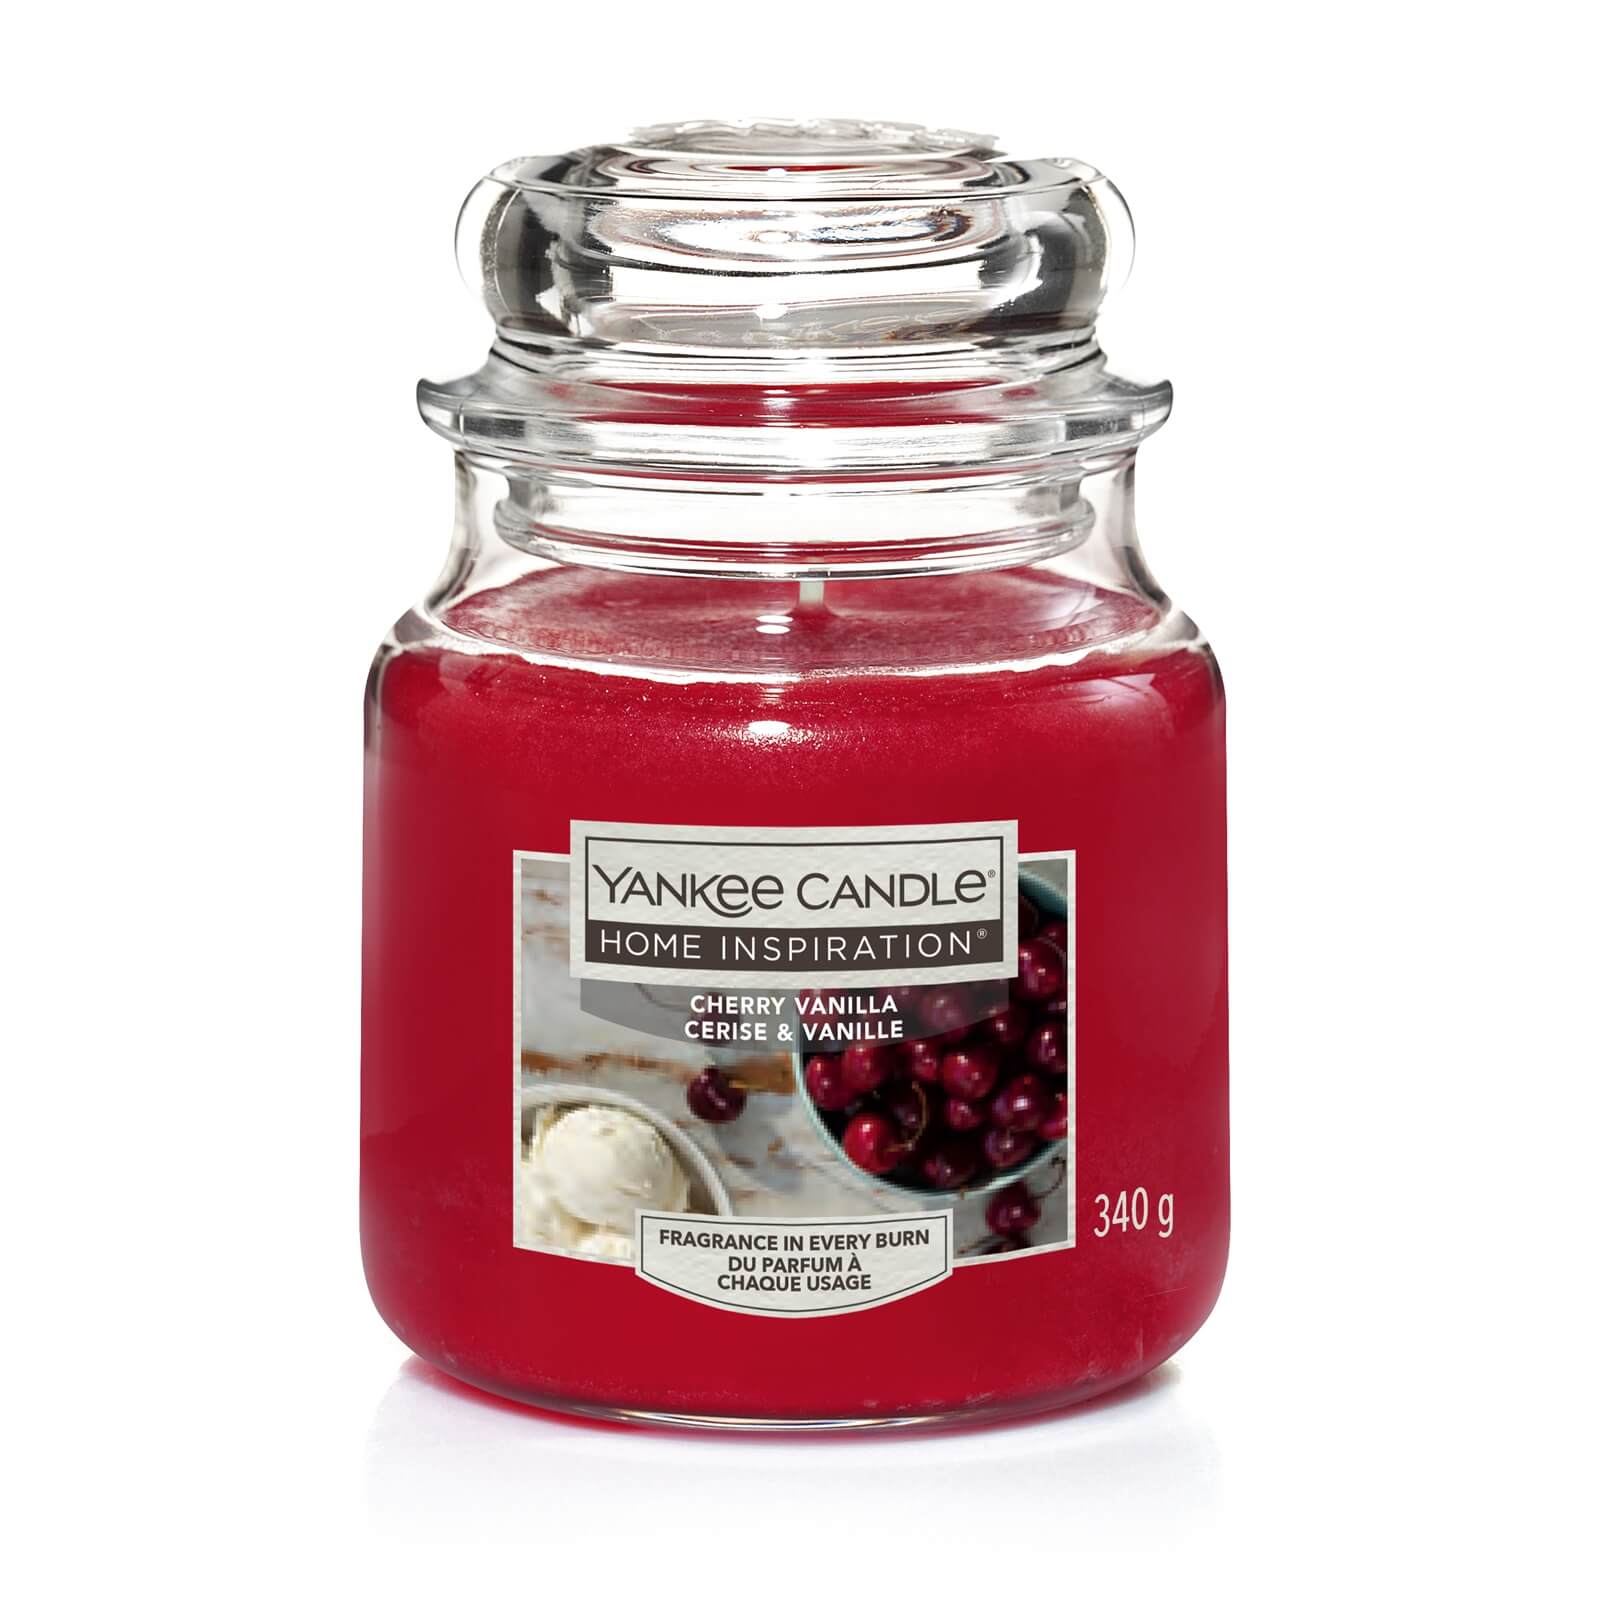 Yankee Candle home Inspiration Scented Candle - Medium Jar - Cherry Vanilla